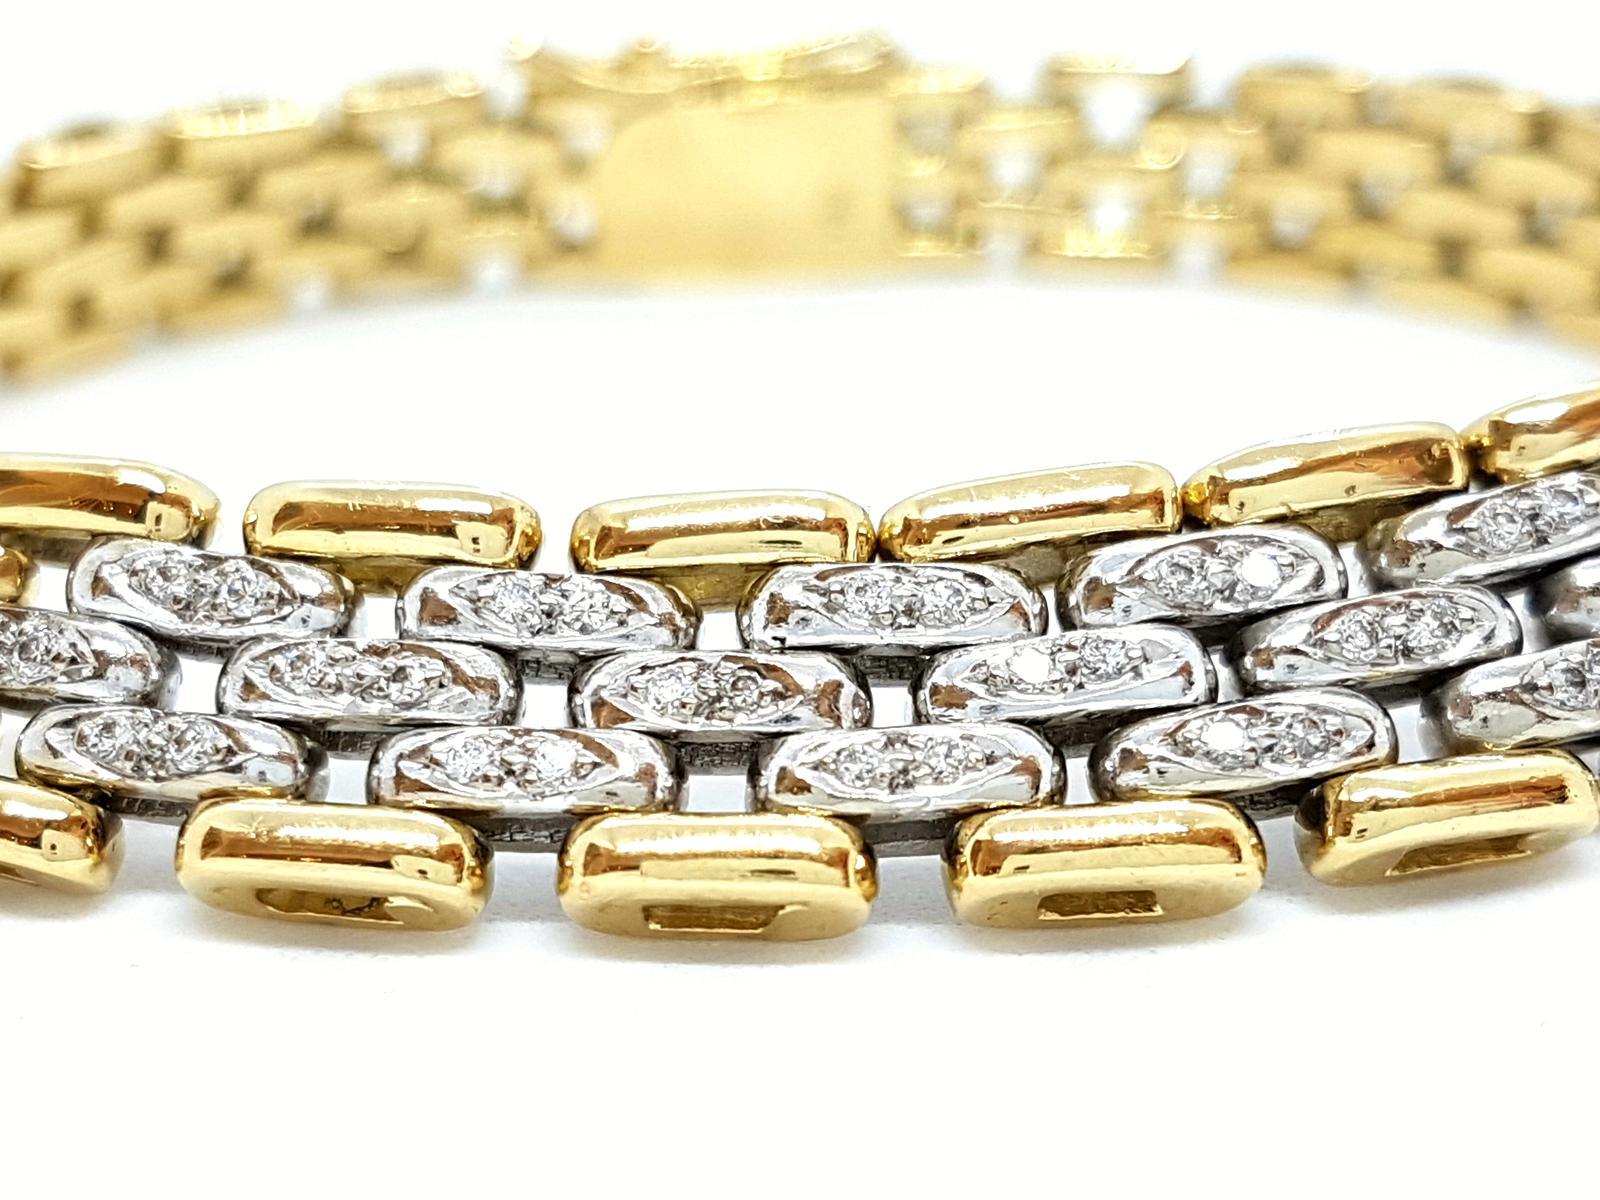 Bracelet bicolor yellow gold and white 750 mils (18 carats). pad 38 of diamonds to about 0.19 ct total metalled The links are made of white gold. width: between 1 cm (paved portion diamonds) and 0.8 cm ( clasp side). length: 19 cm. punched. Weight: